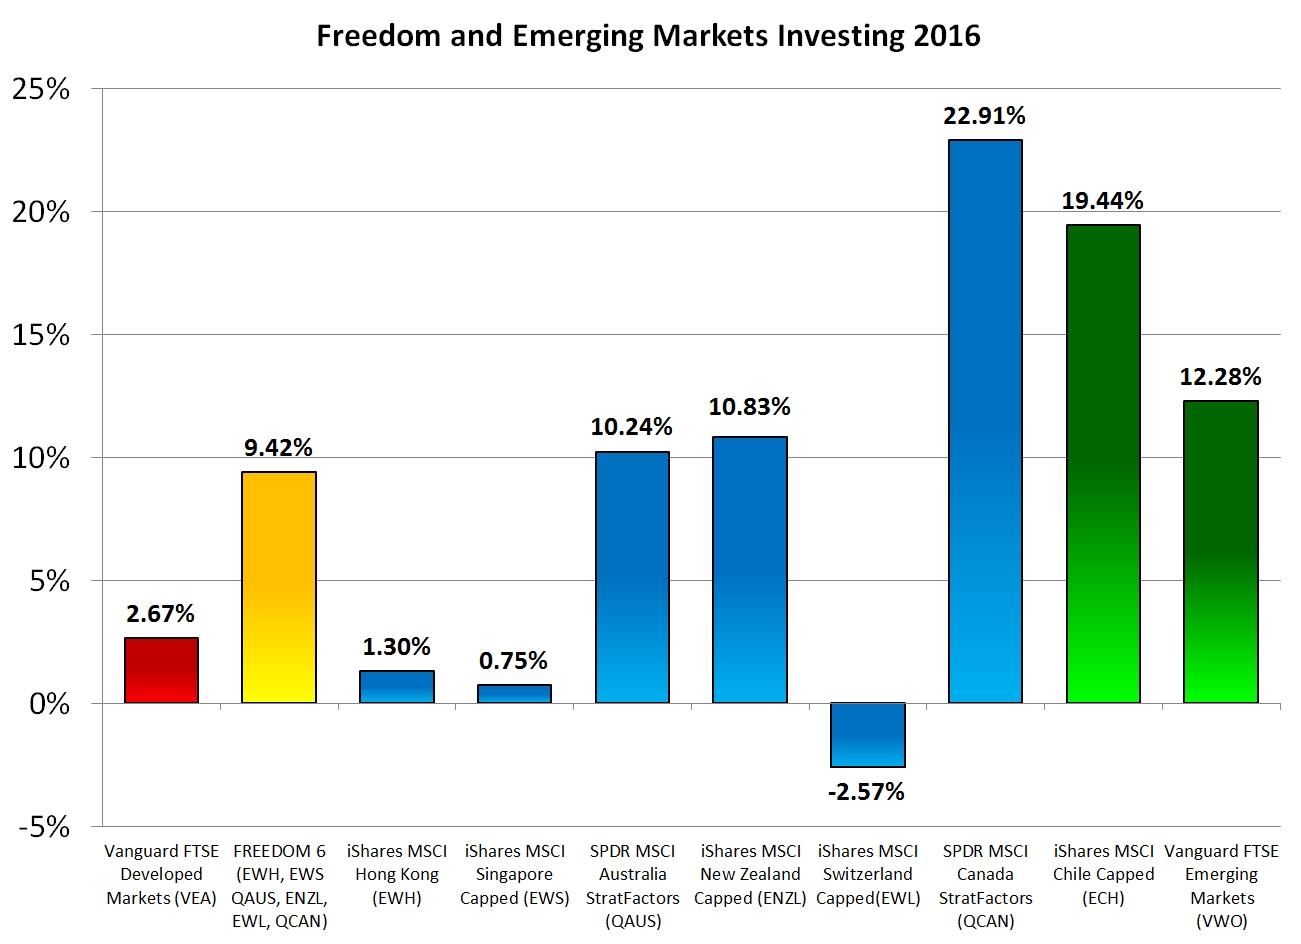 Freedom Investing and Emerging Markets in 2016